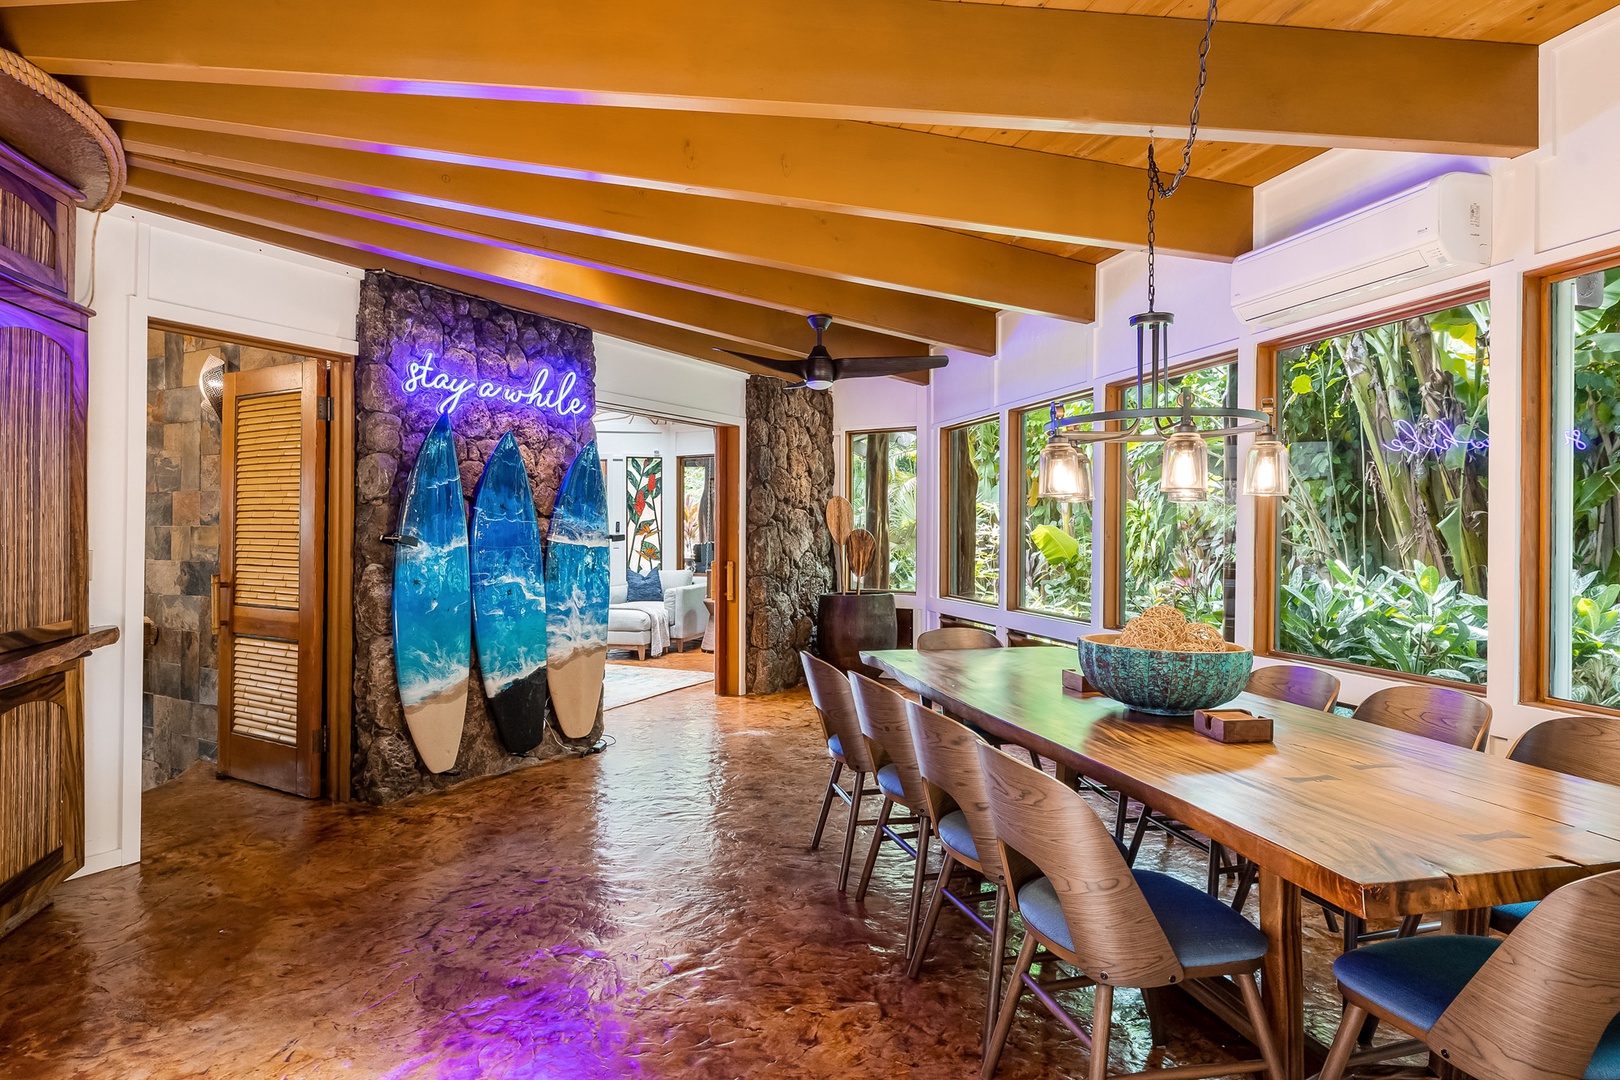 Waimanalo Vacation Rentals, Hawaii Hobbit House - Dining area opens to main living area and kitchen.